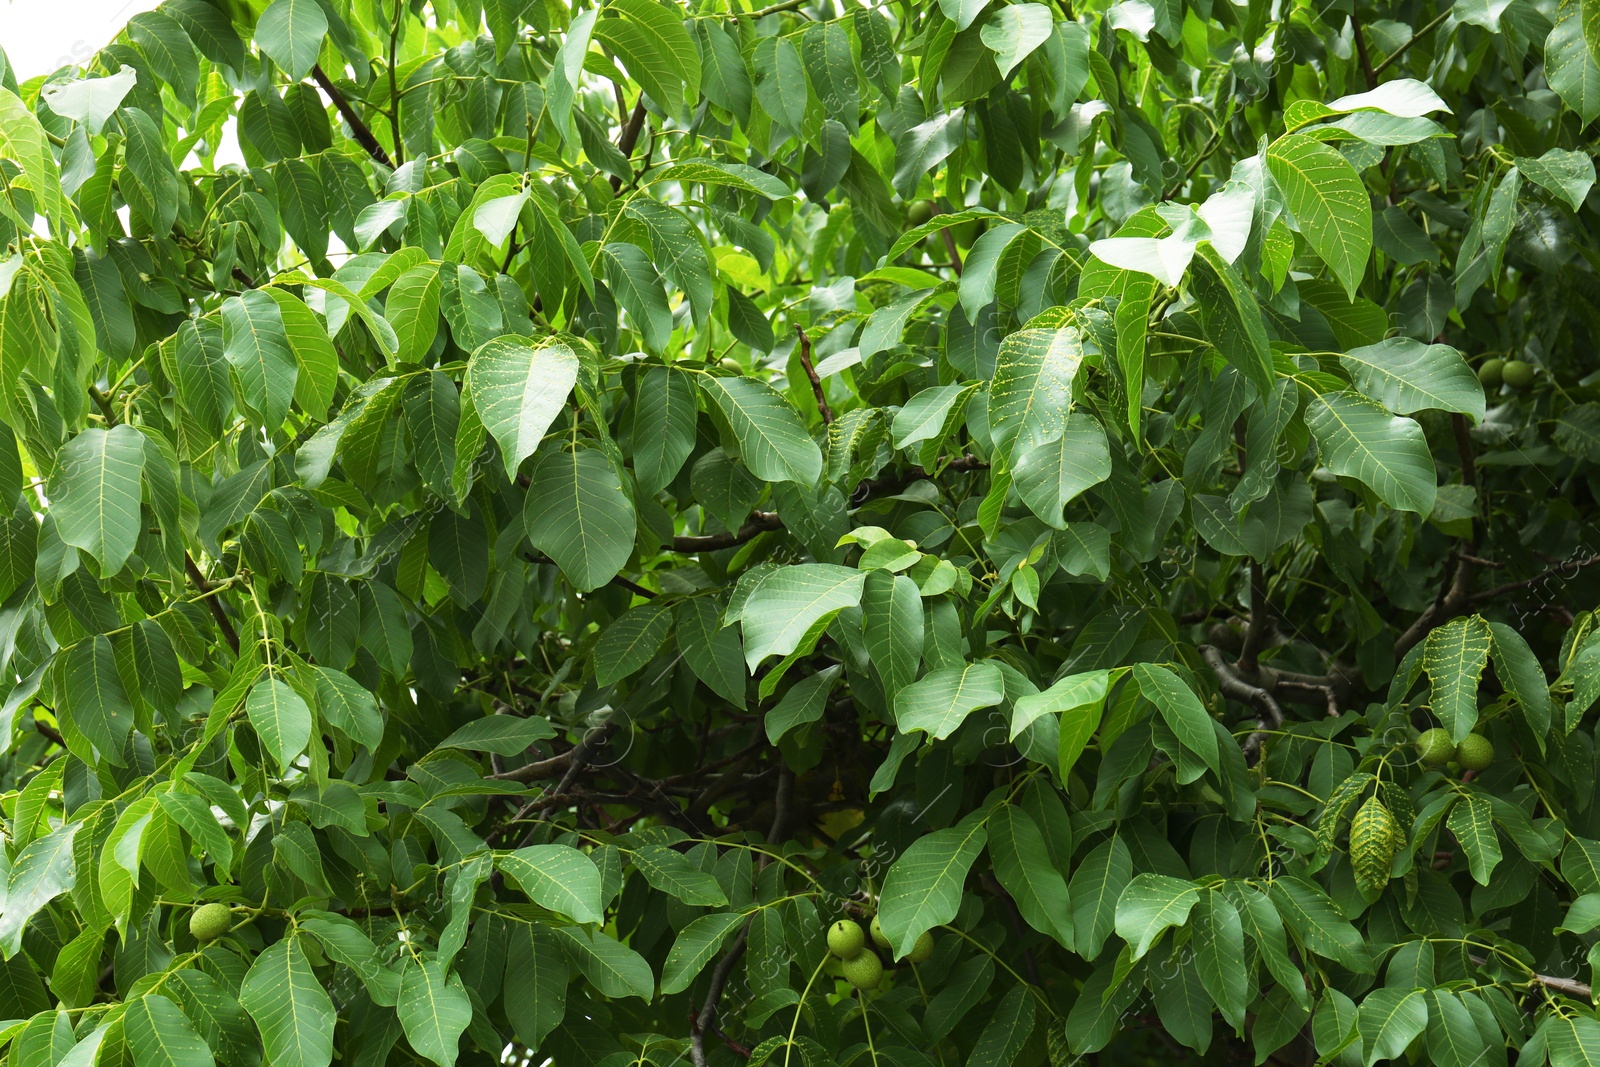 Photo of Green unripe walnuts on tree branches outdoors